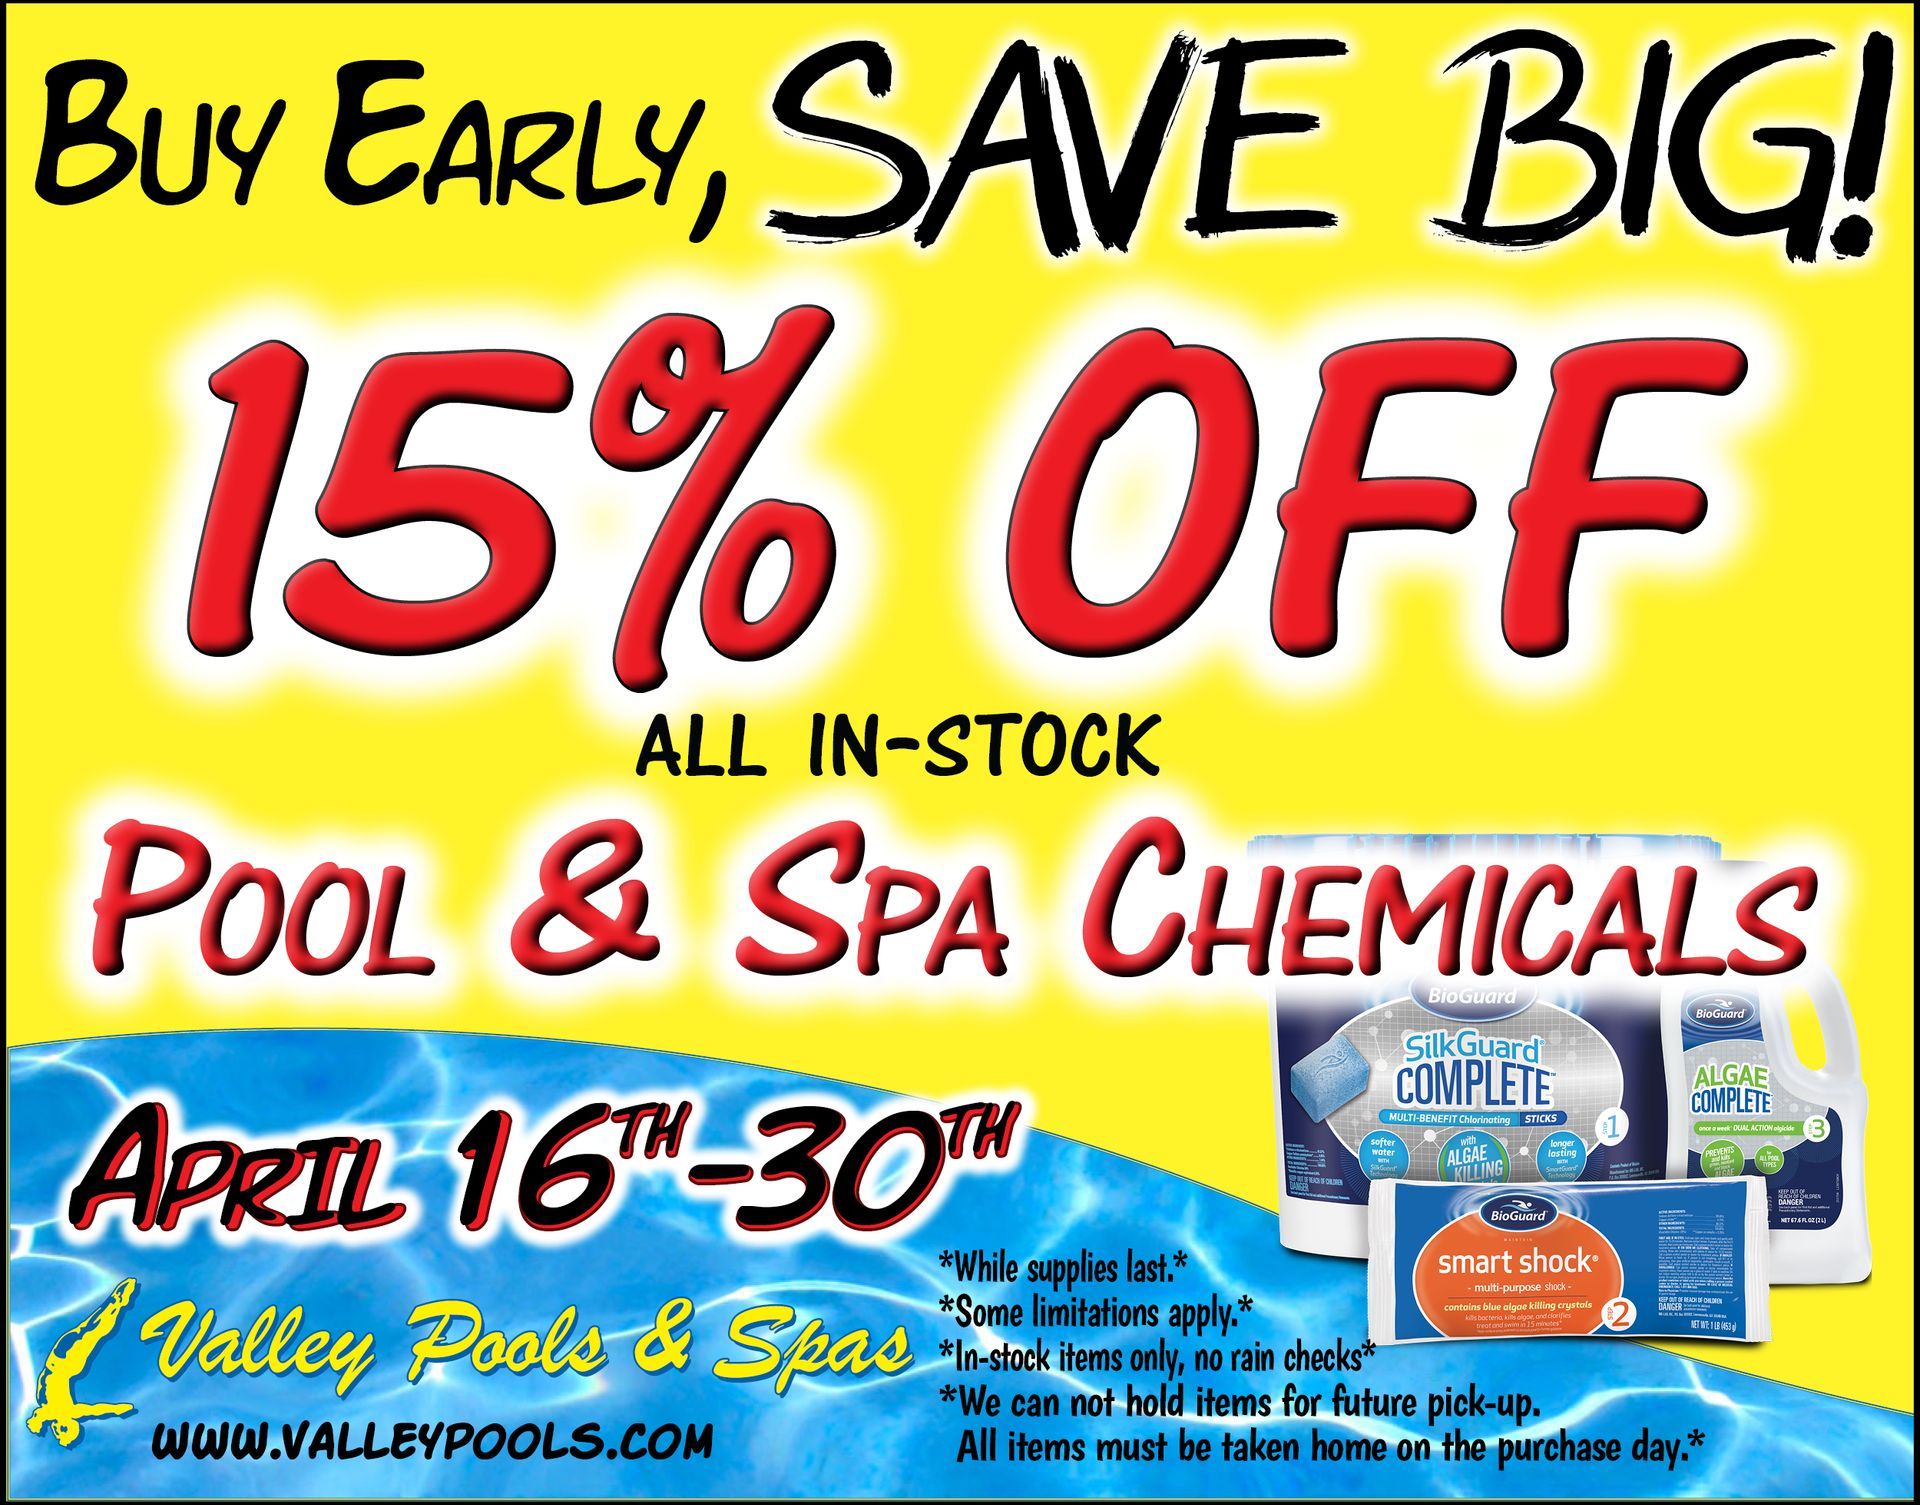 Buy Early, Save BIG!  20% Off Chemicals Until April 15th